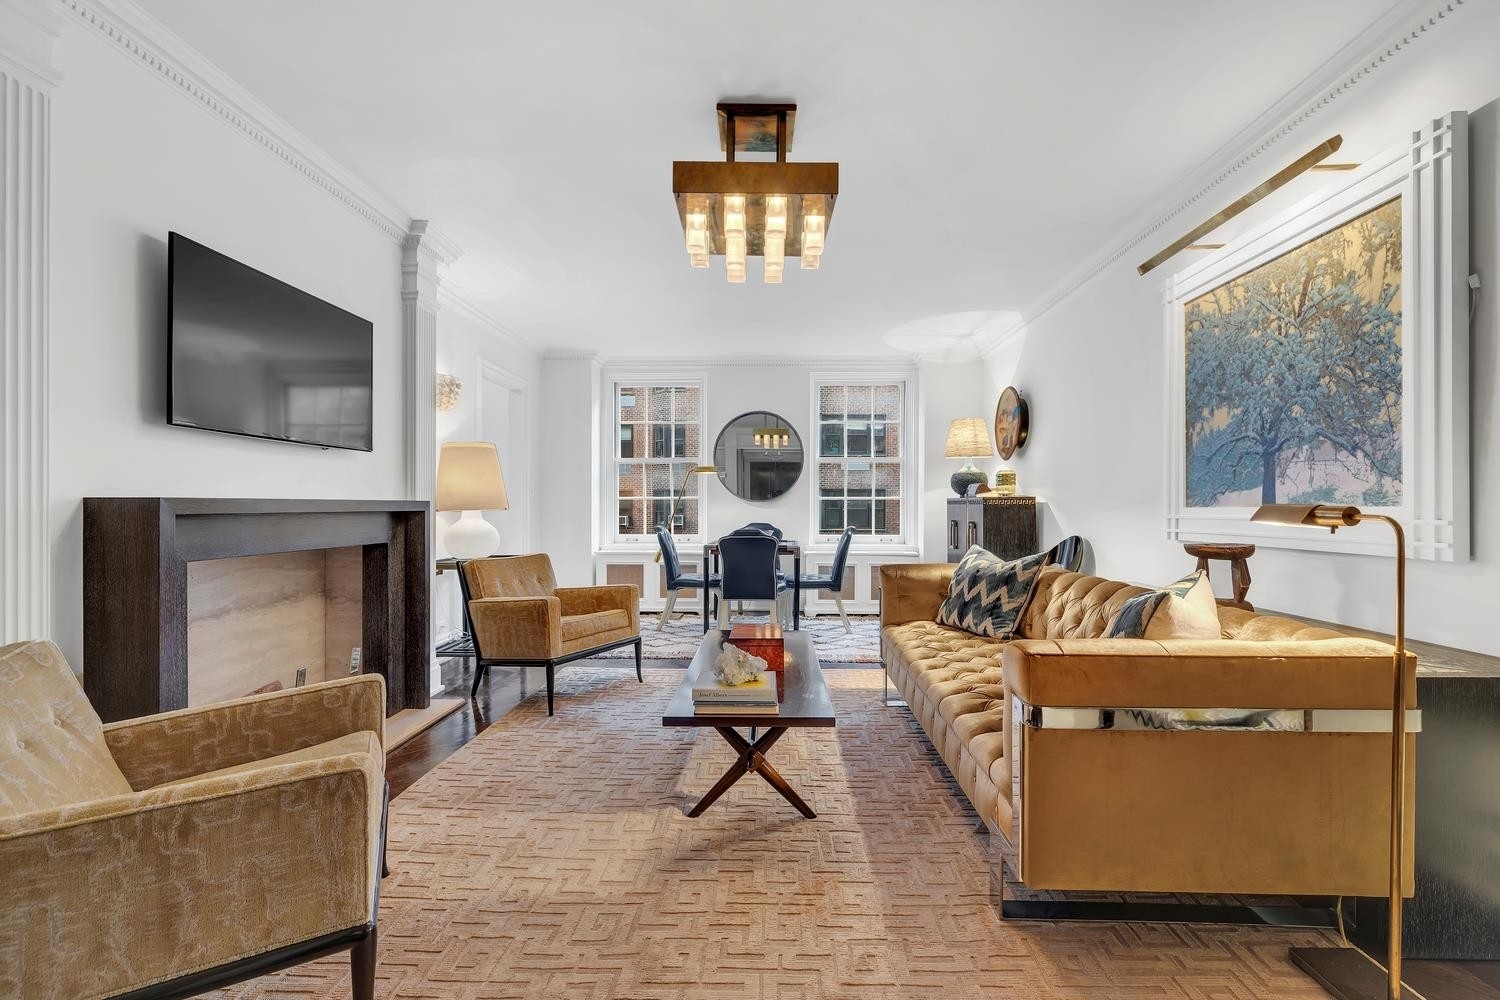 Co-op Properties for Sale at 14 SUTTON PL S, 7C Sutton Place, New York, New York 10022